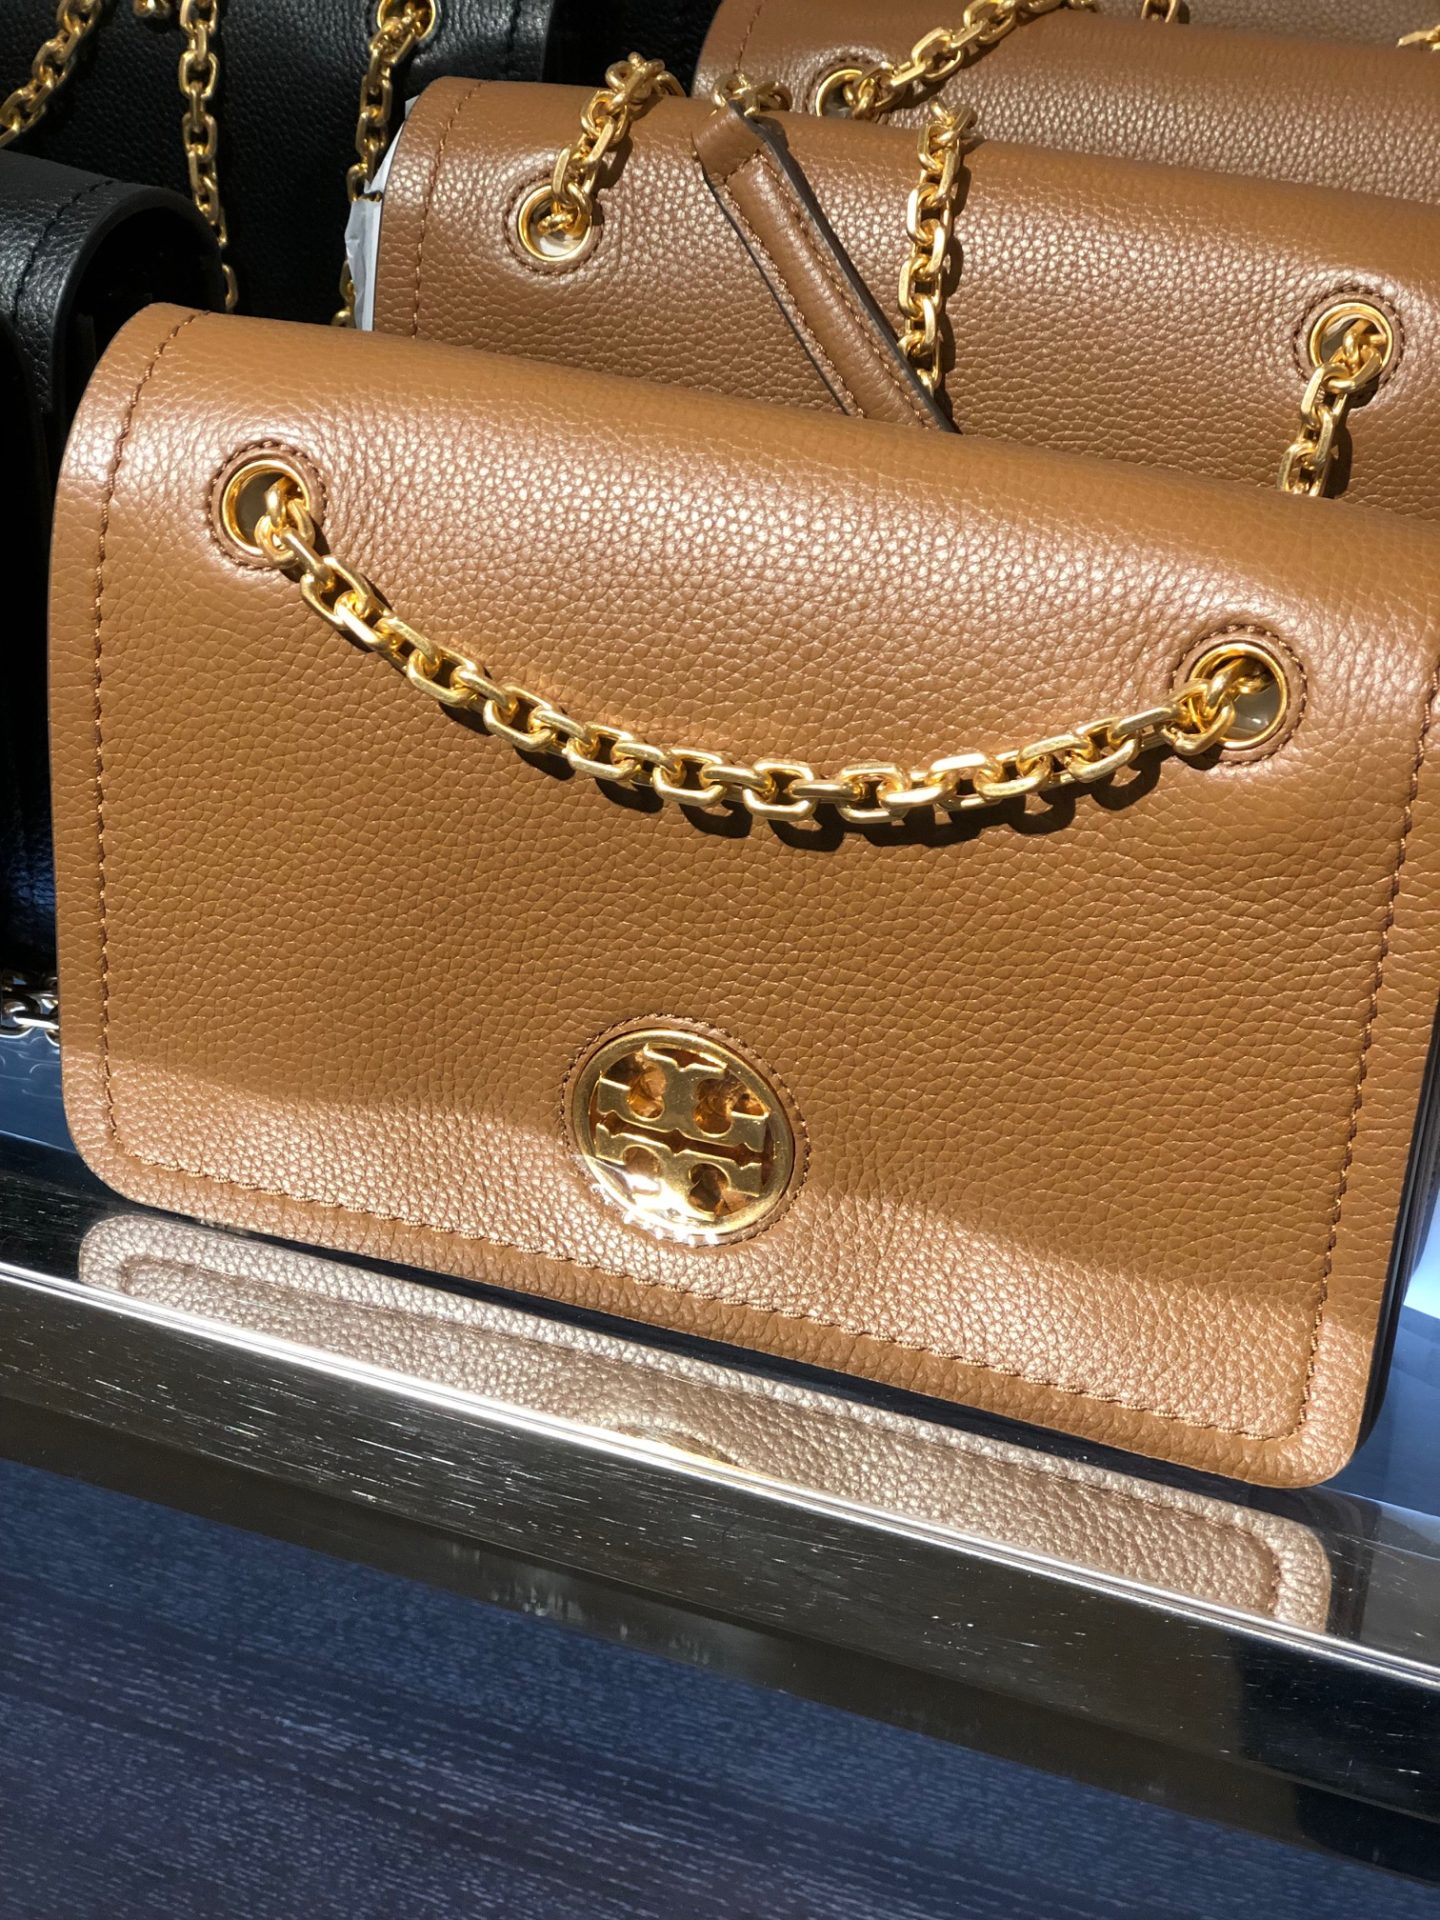 New Tory Burch Markdowns | Up To 60% Off! - The Double Take Girls